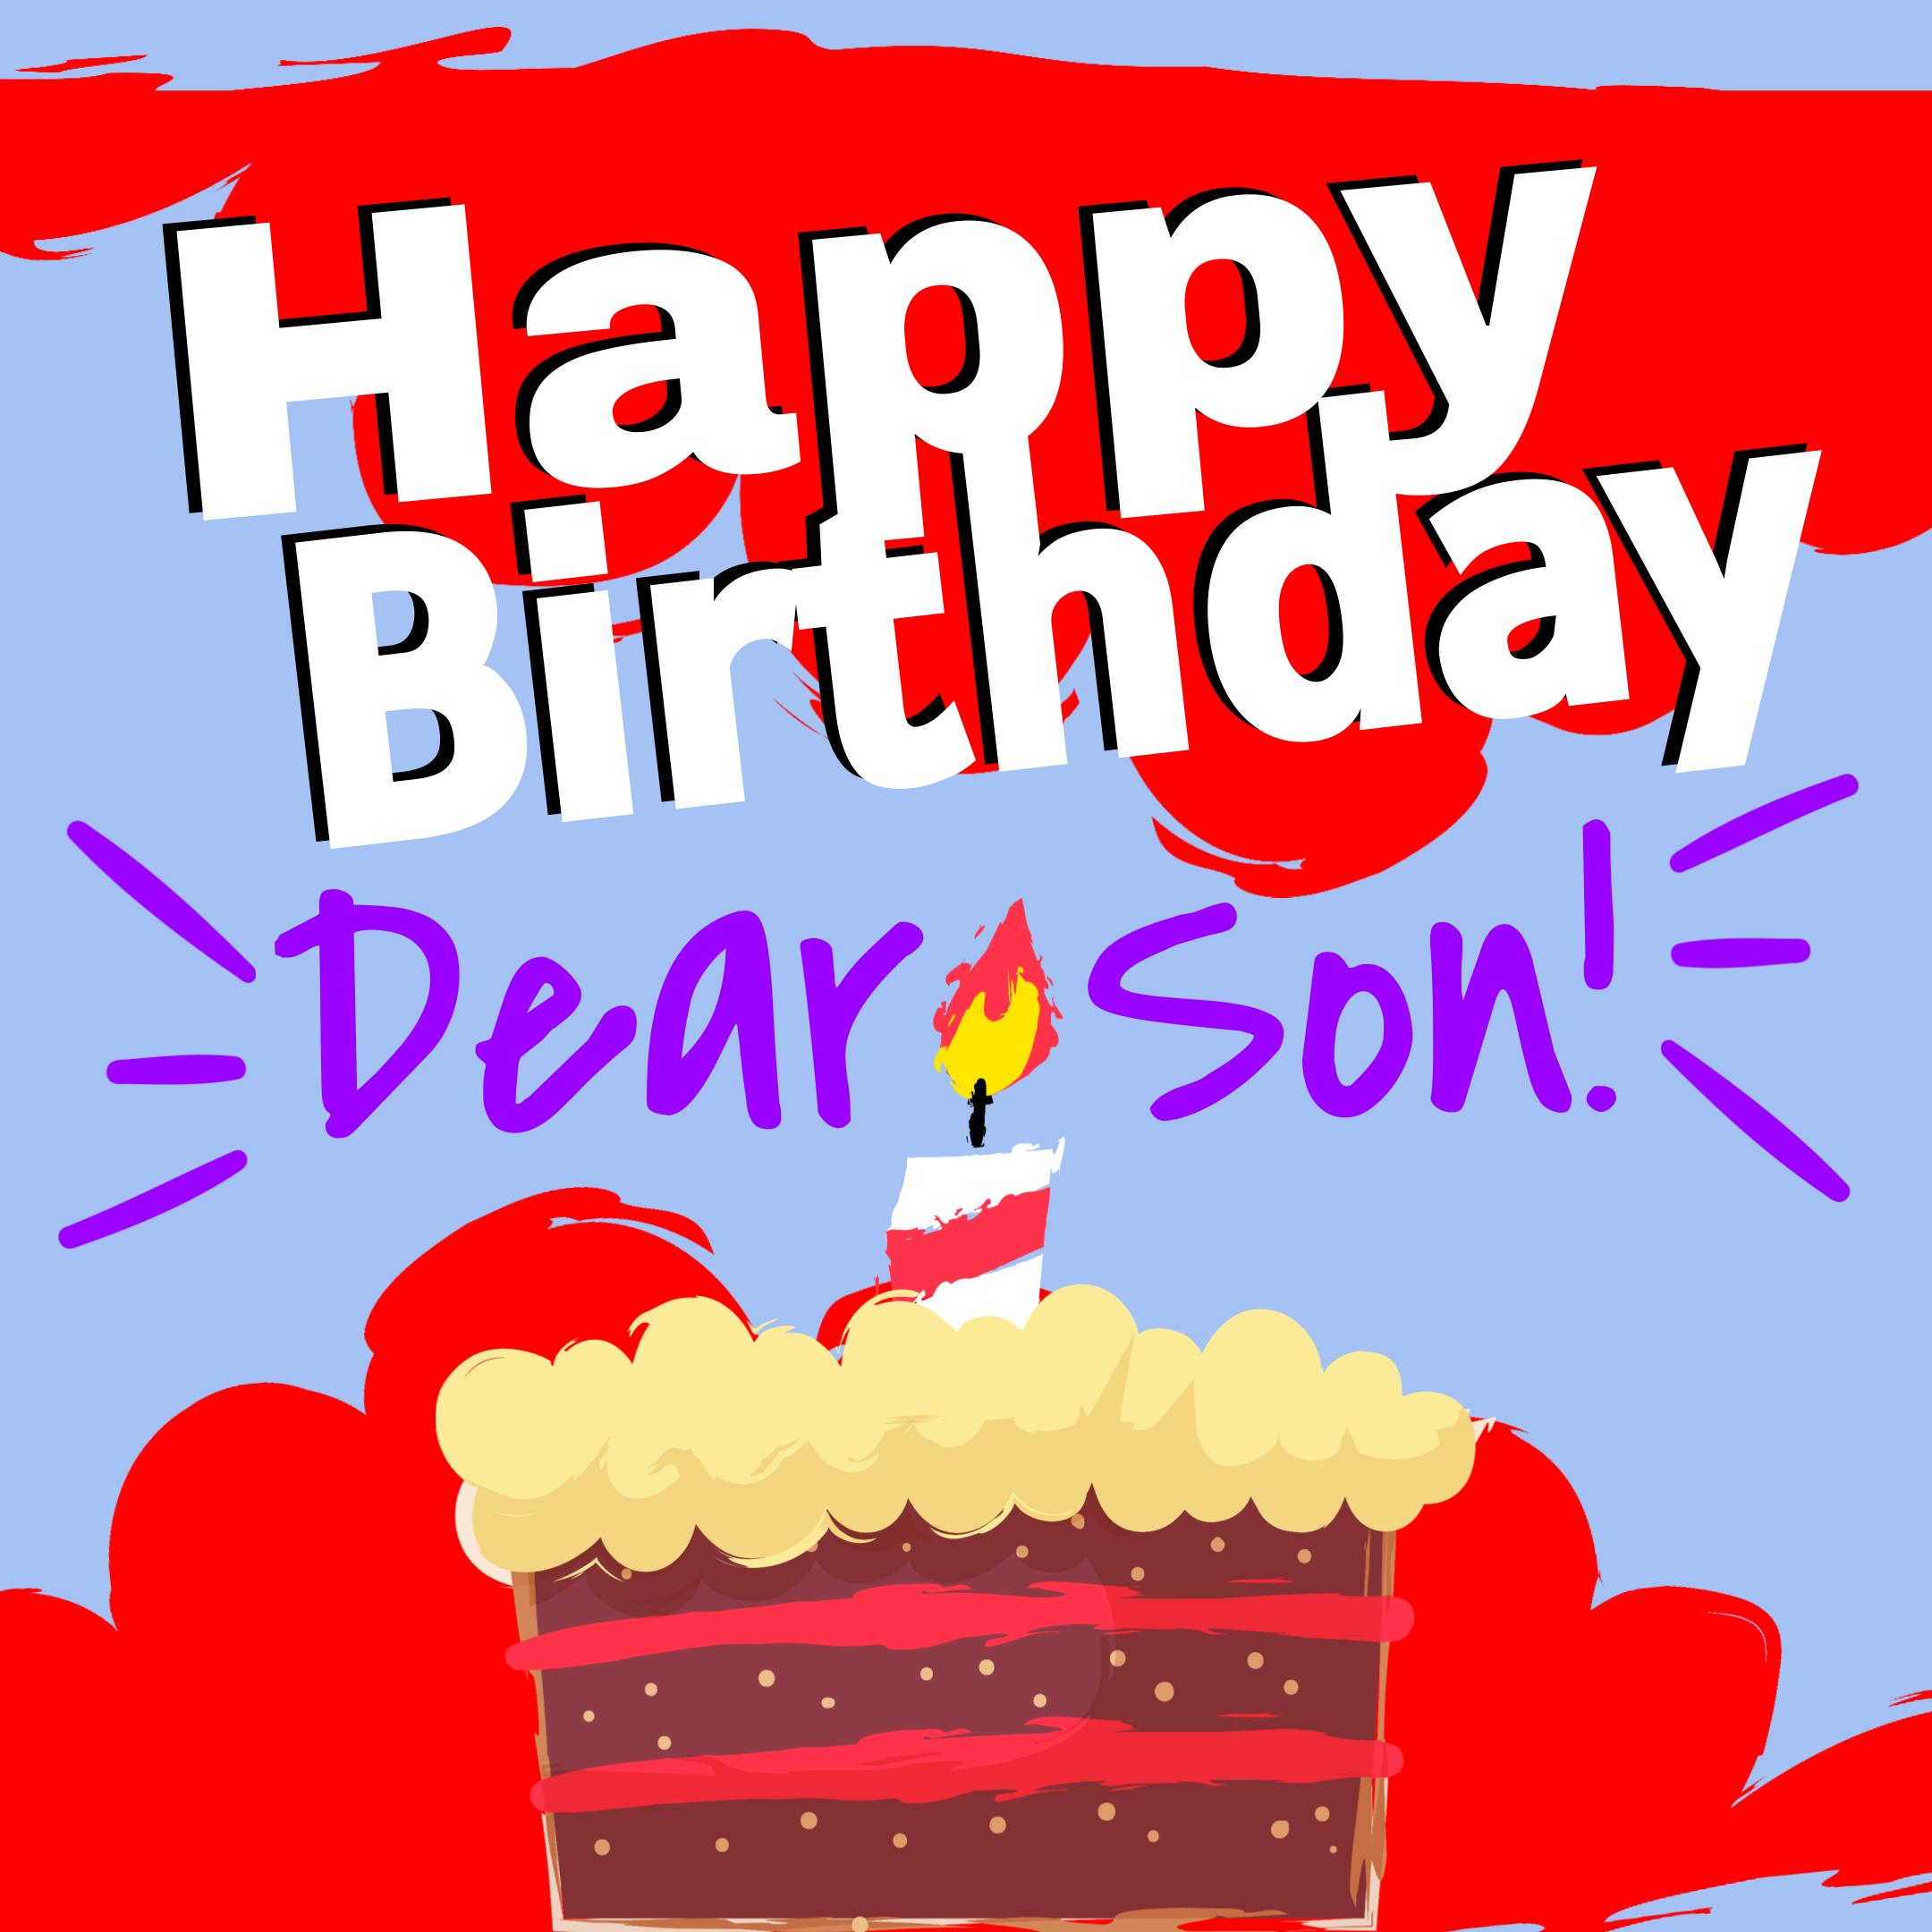 Free Happy Birthday Wishes and Images for Son with Cake - birthdayimg.com